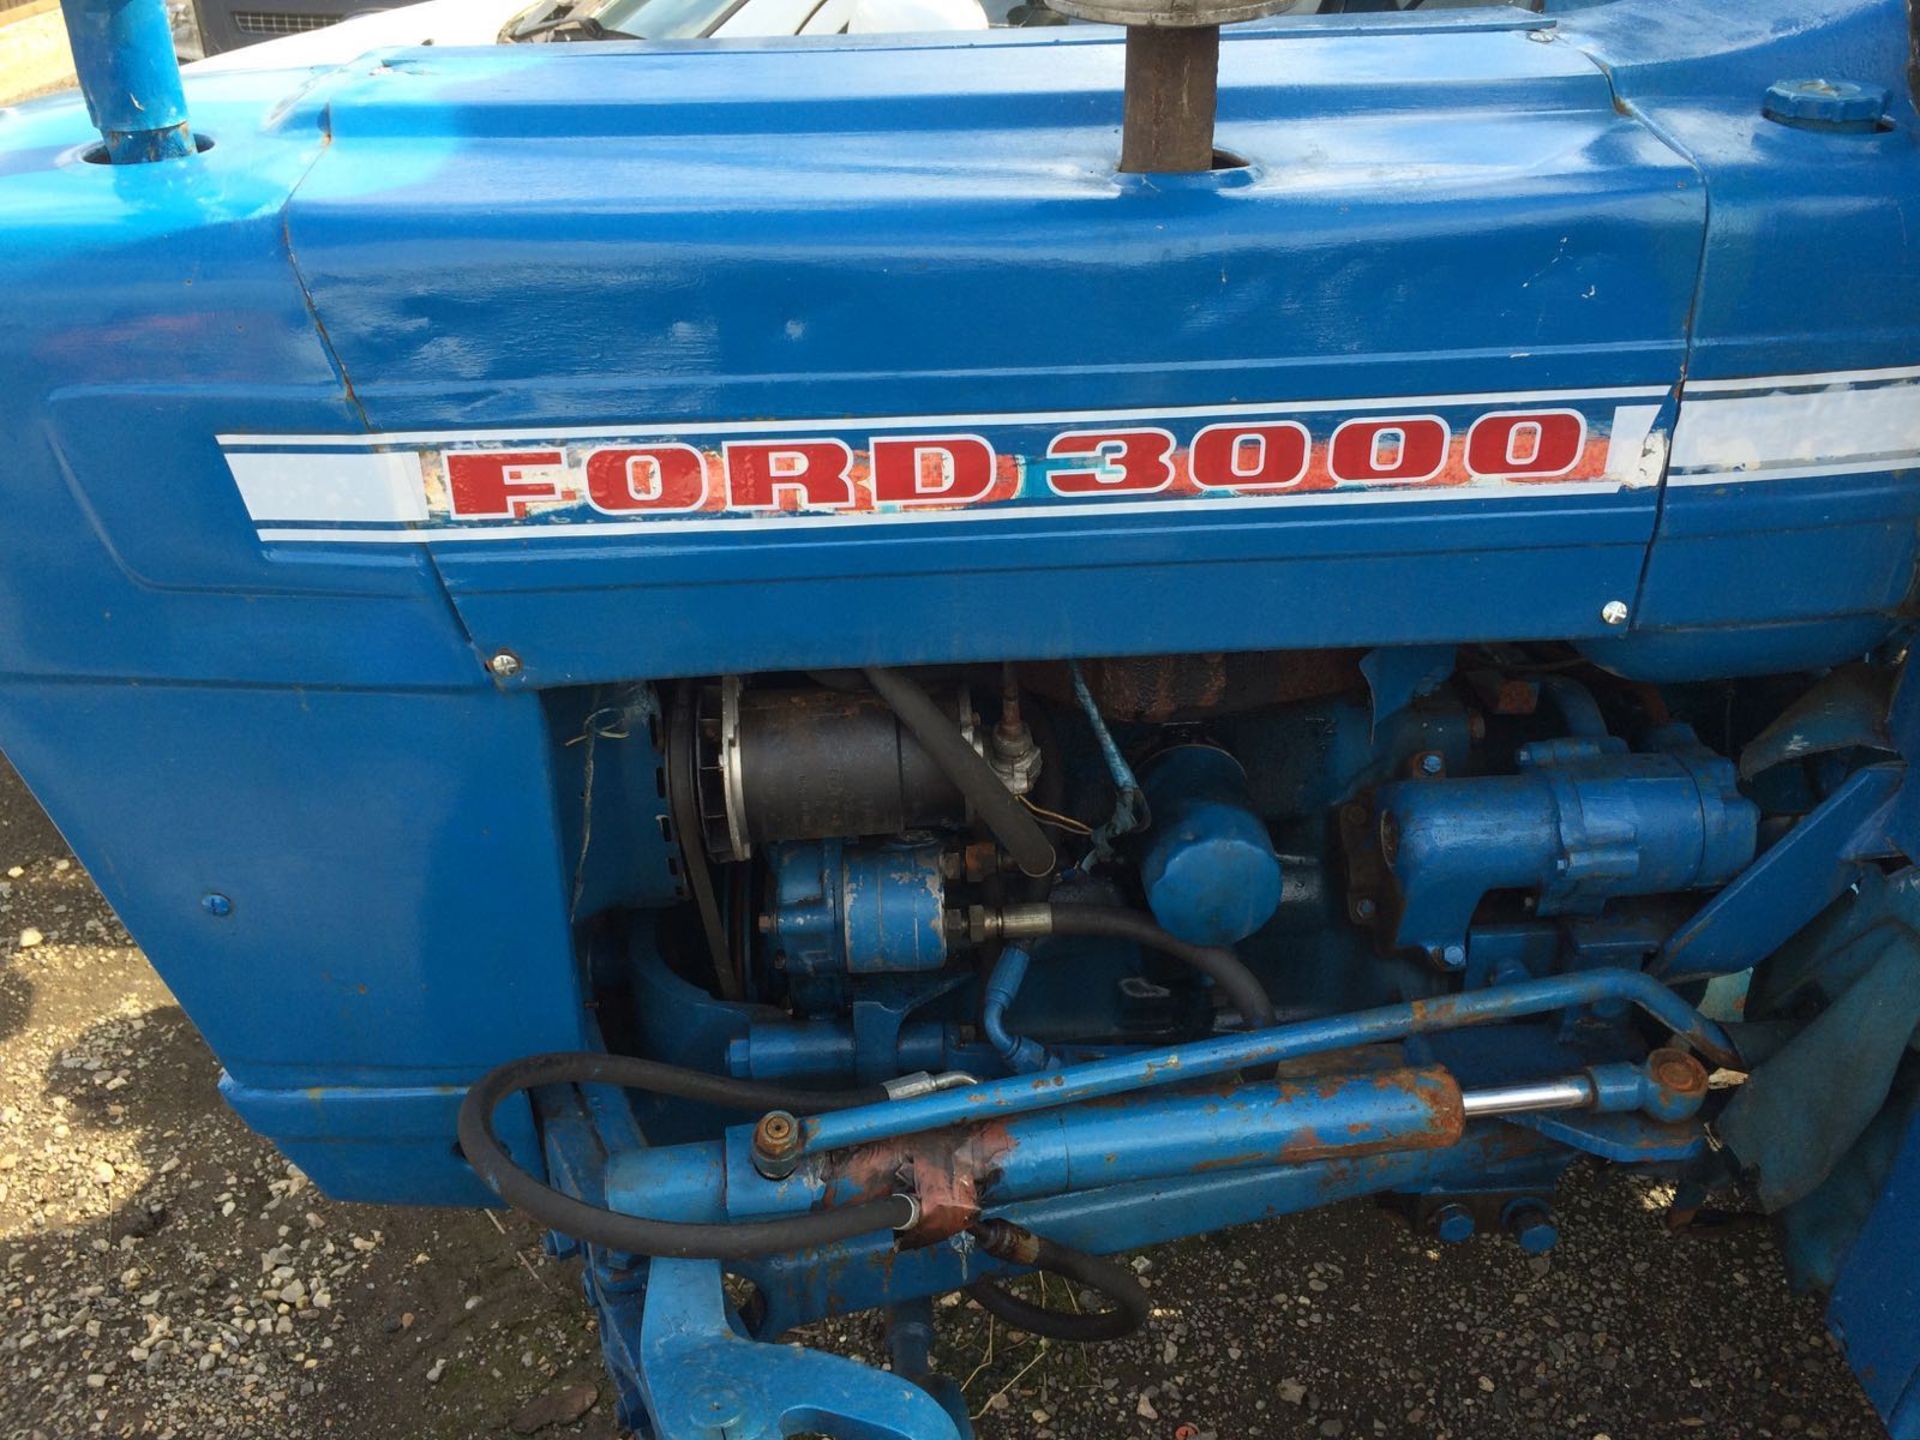 FORD 3000 TRACTAR - Image 2 of 5